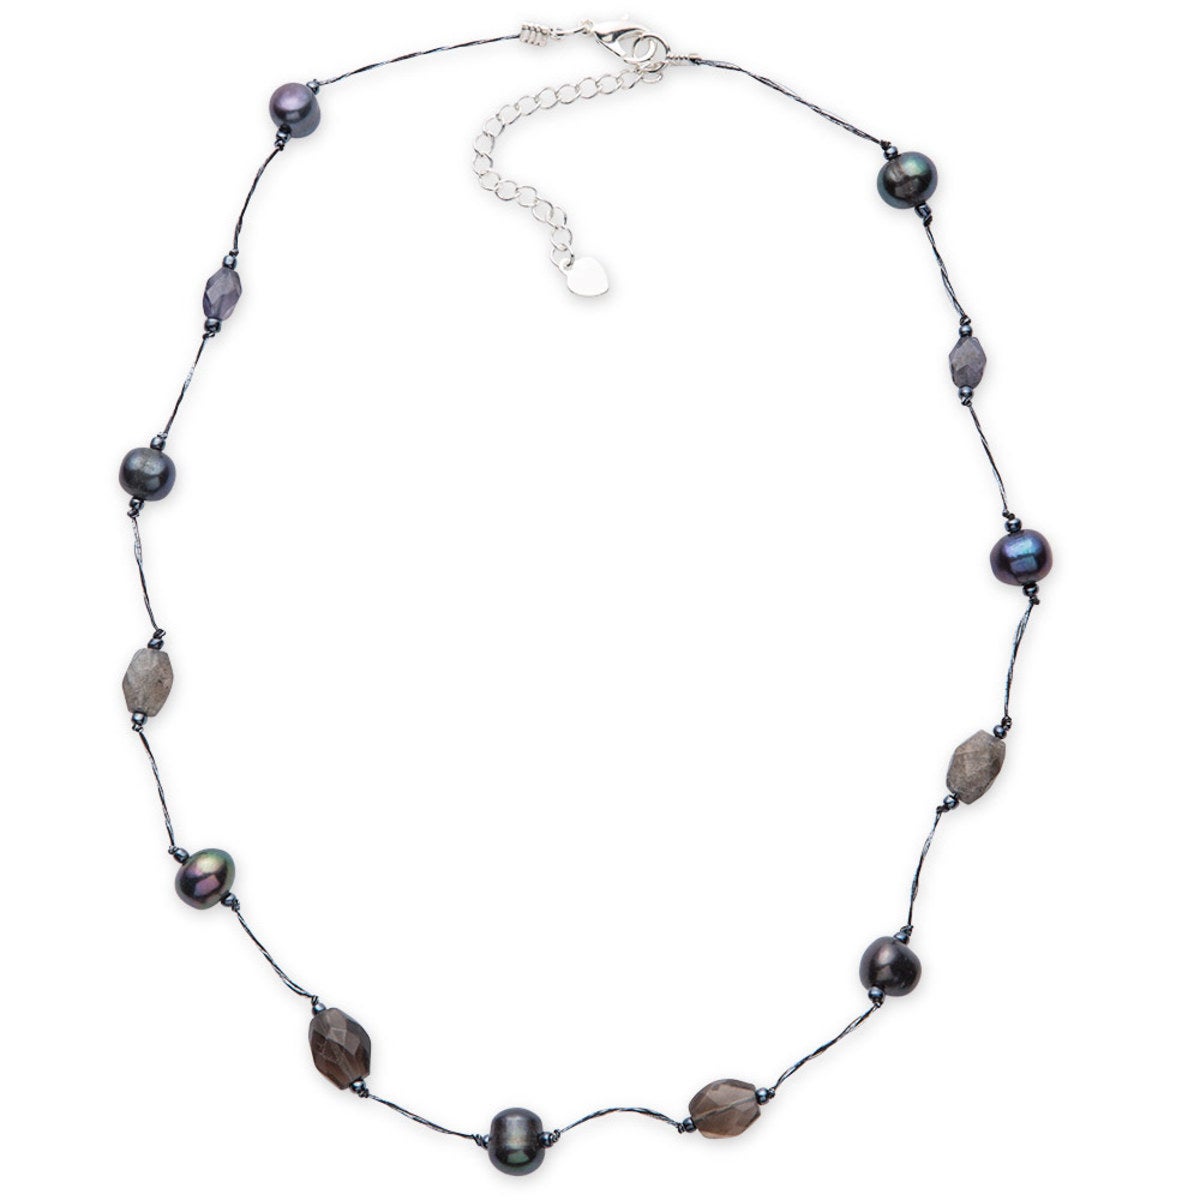 Silk Threaded Freshwater Pearl and Gemstone Necklace